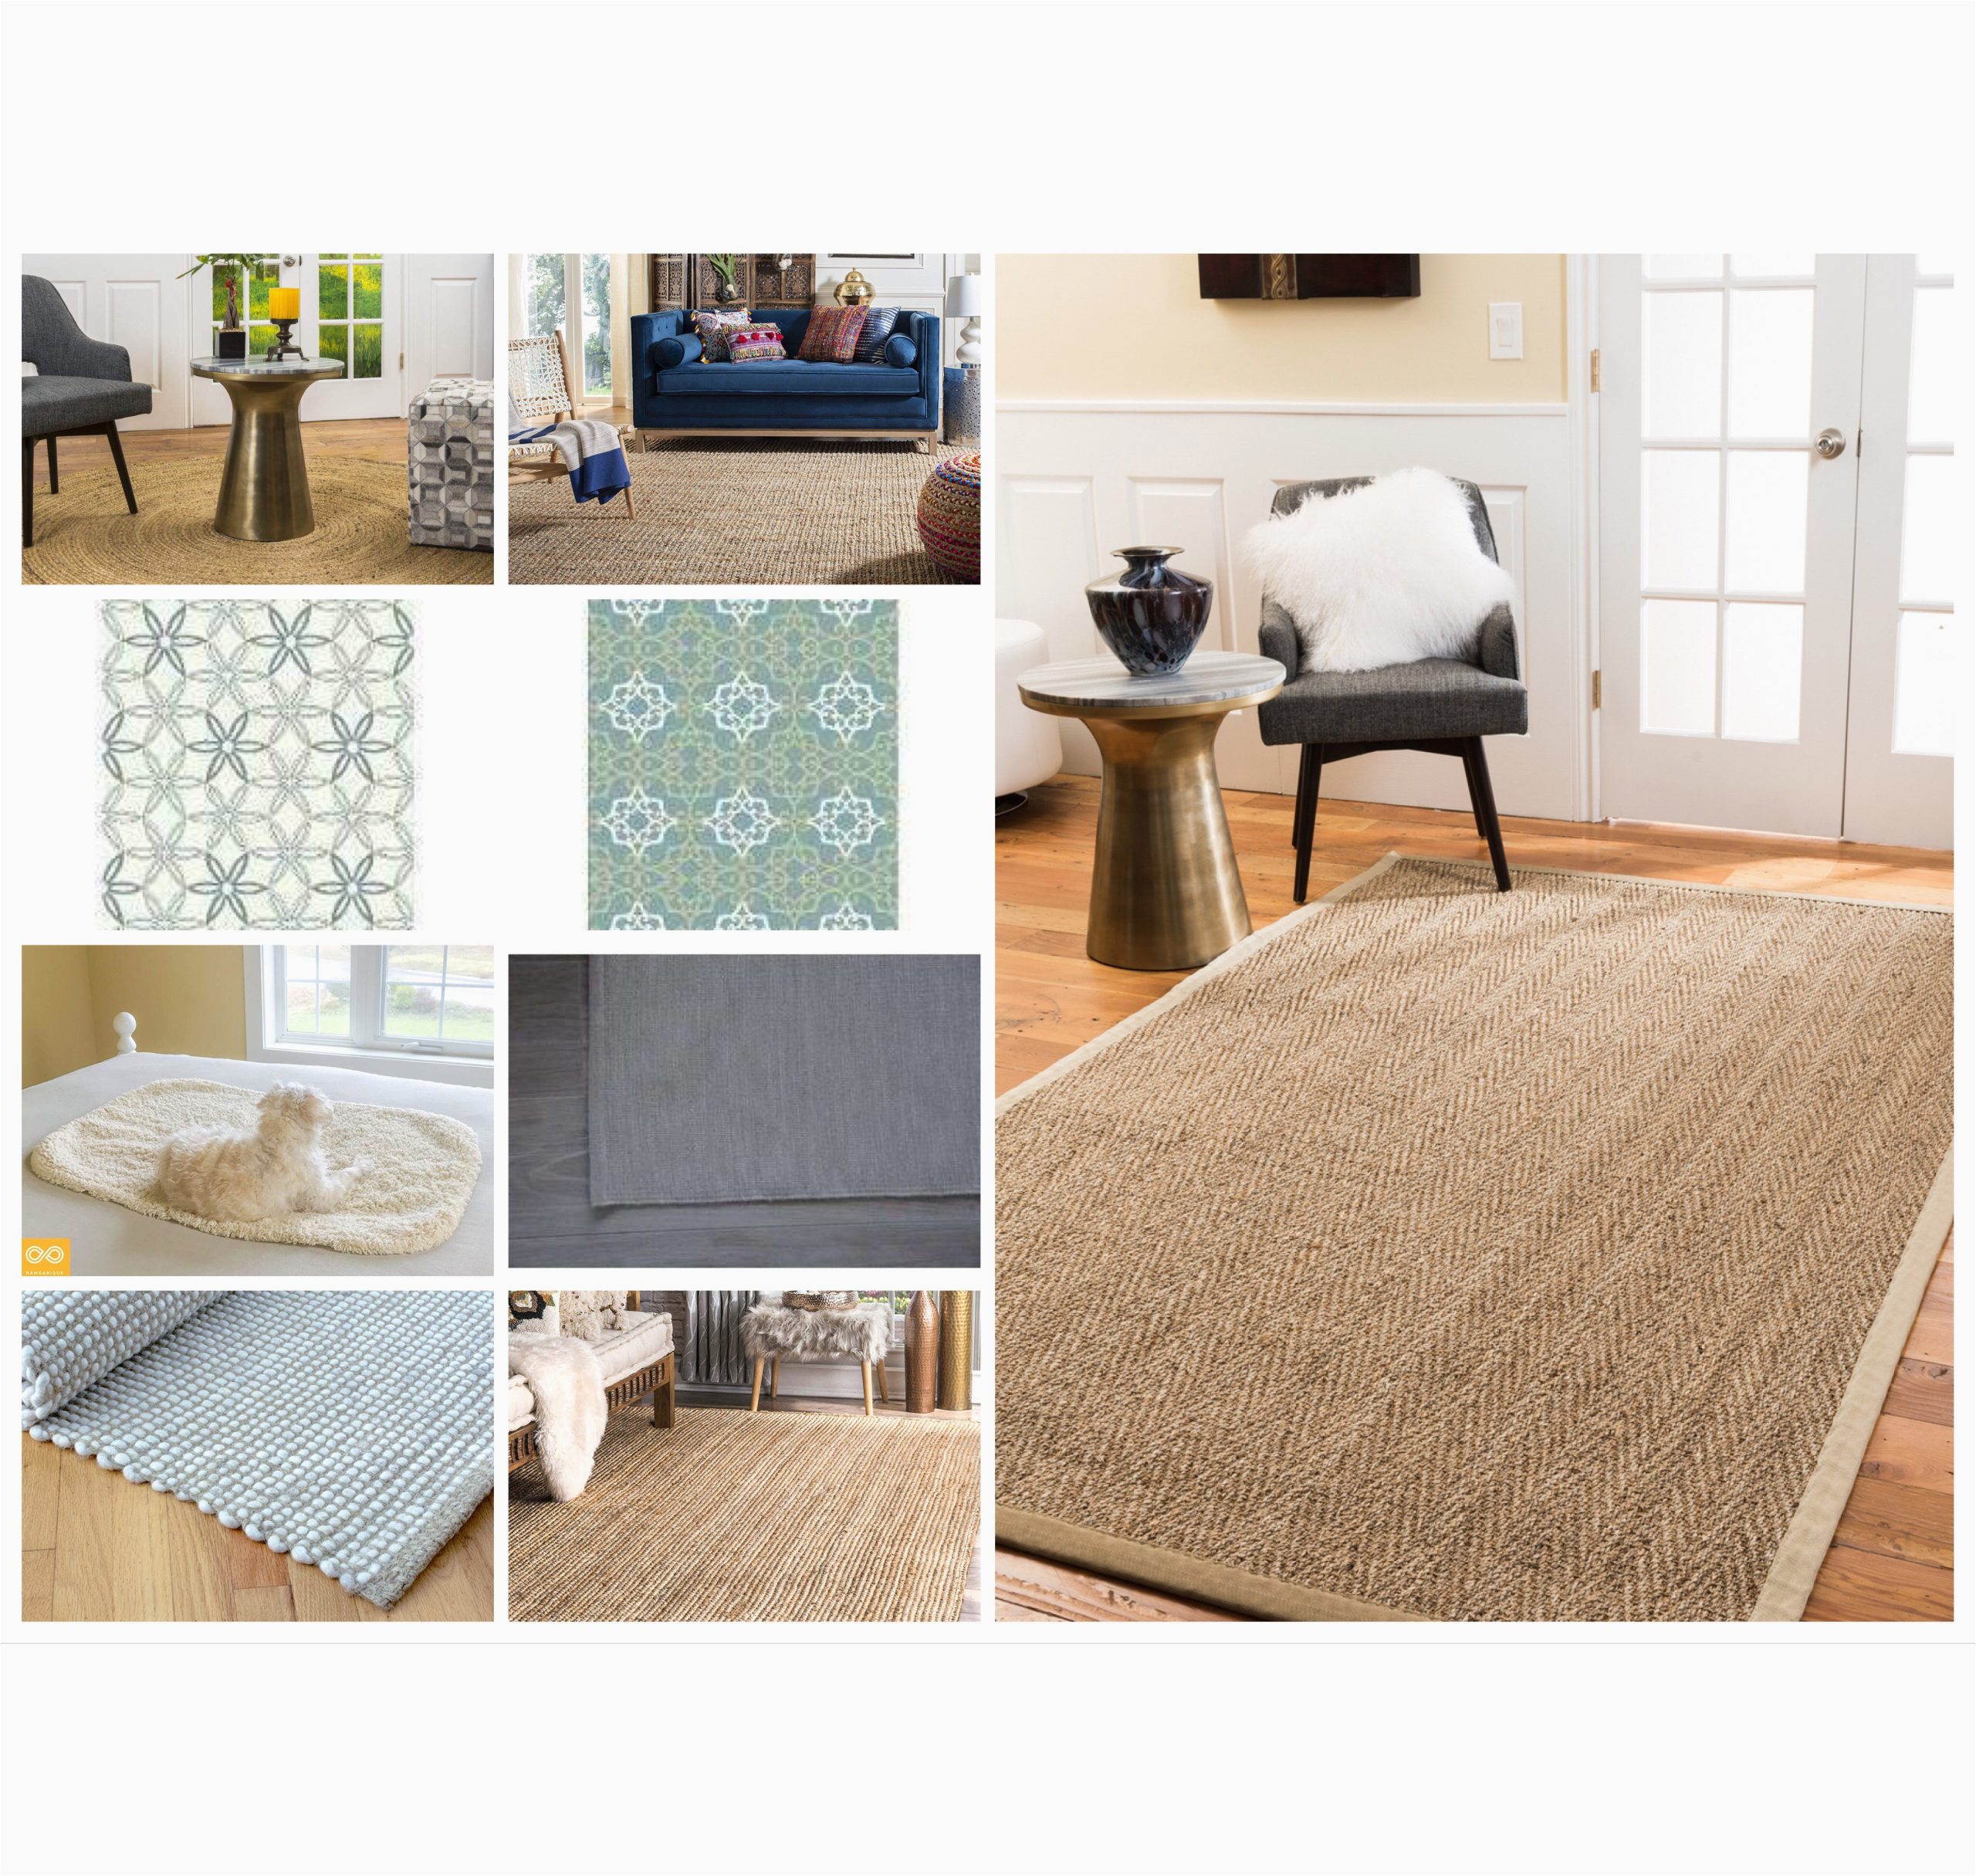 Best Non toxic area Rugs Non toxic Rugs – What Non toxic, Natural Rugs are Best?